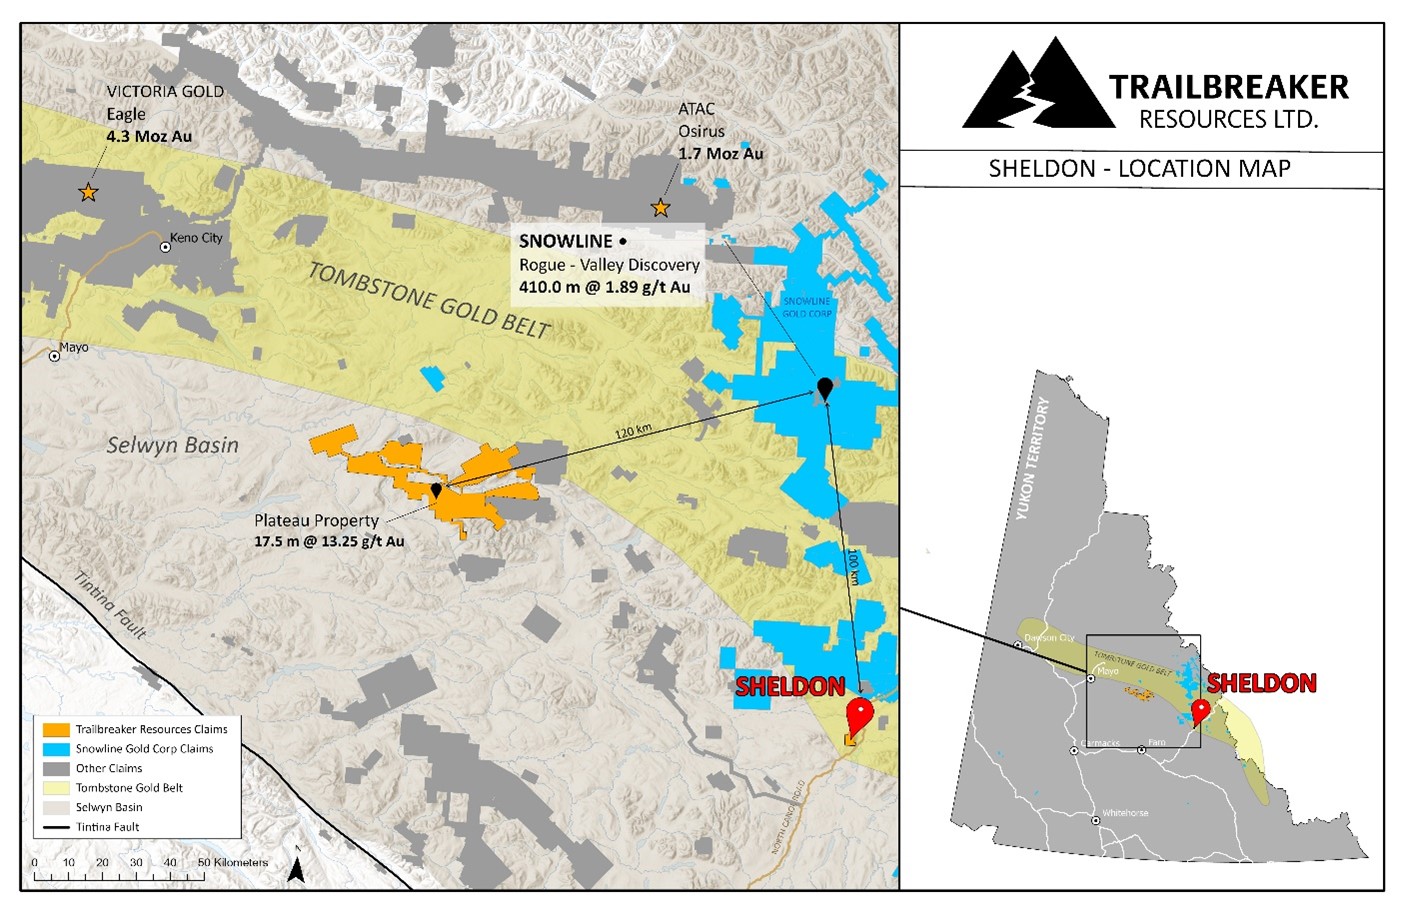 Location of the Sheldon property within the Tombstone Gold Belt and the Selwyn Basin.